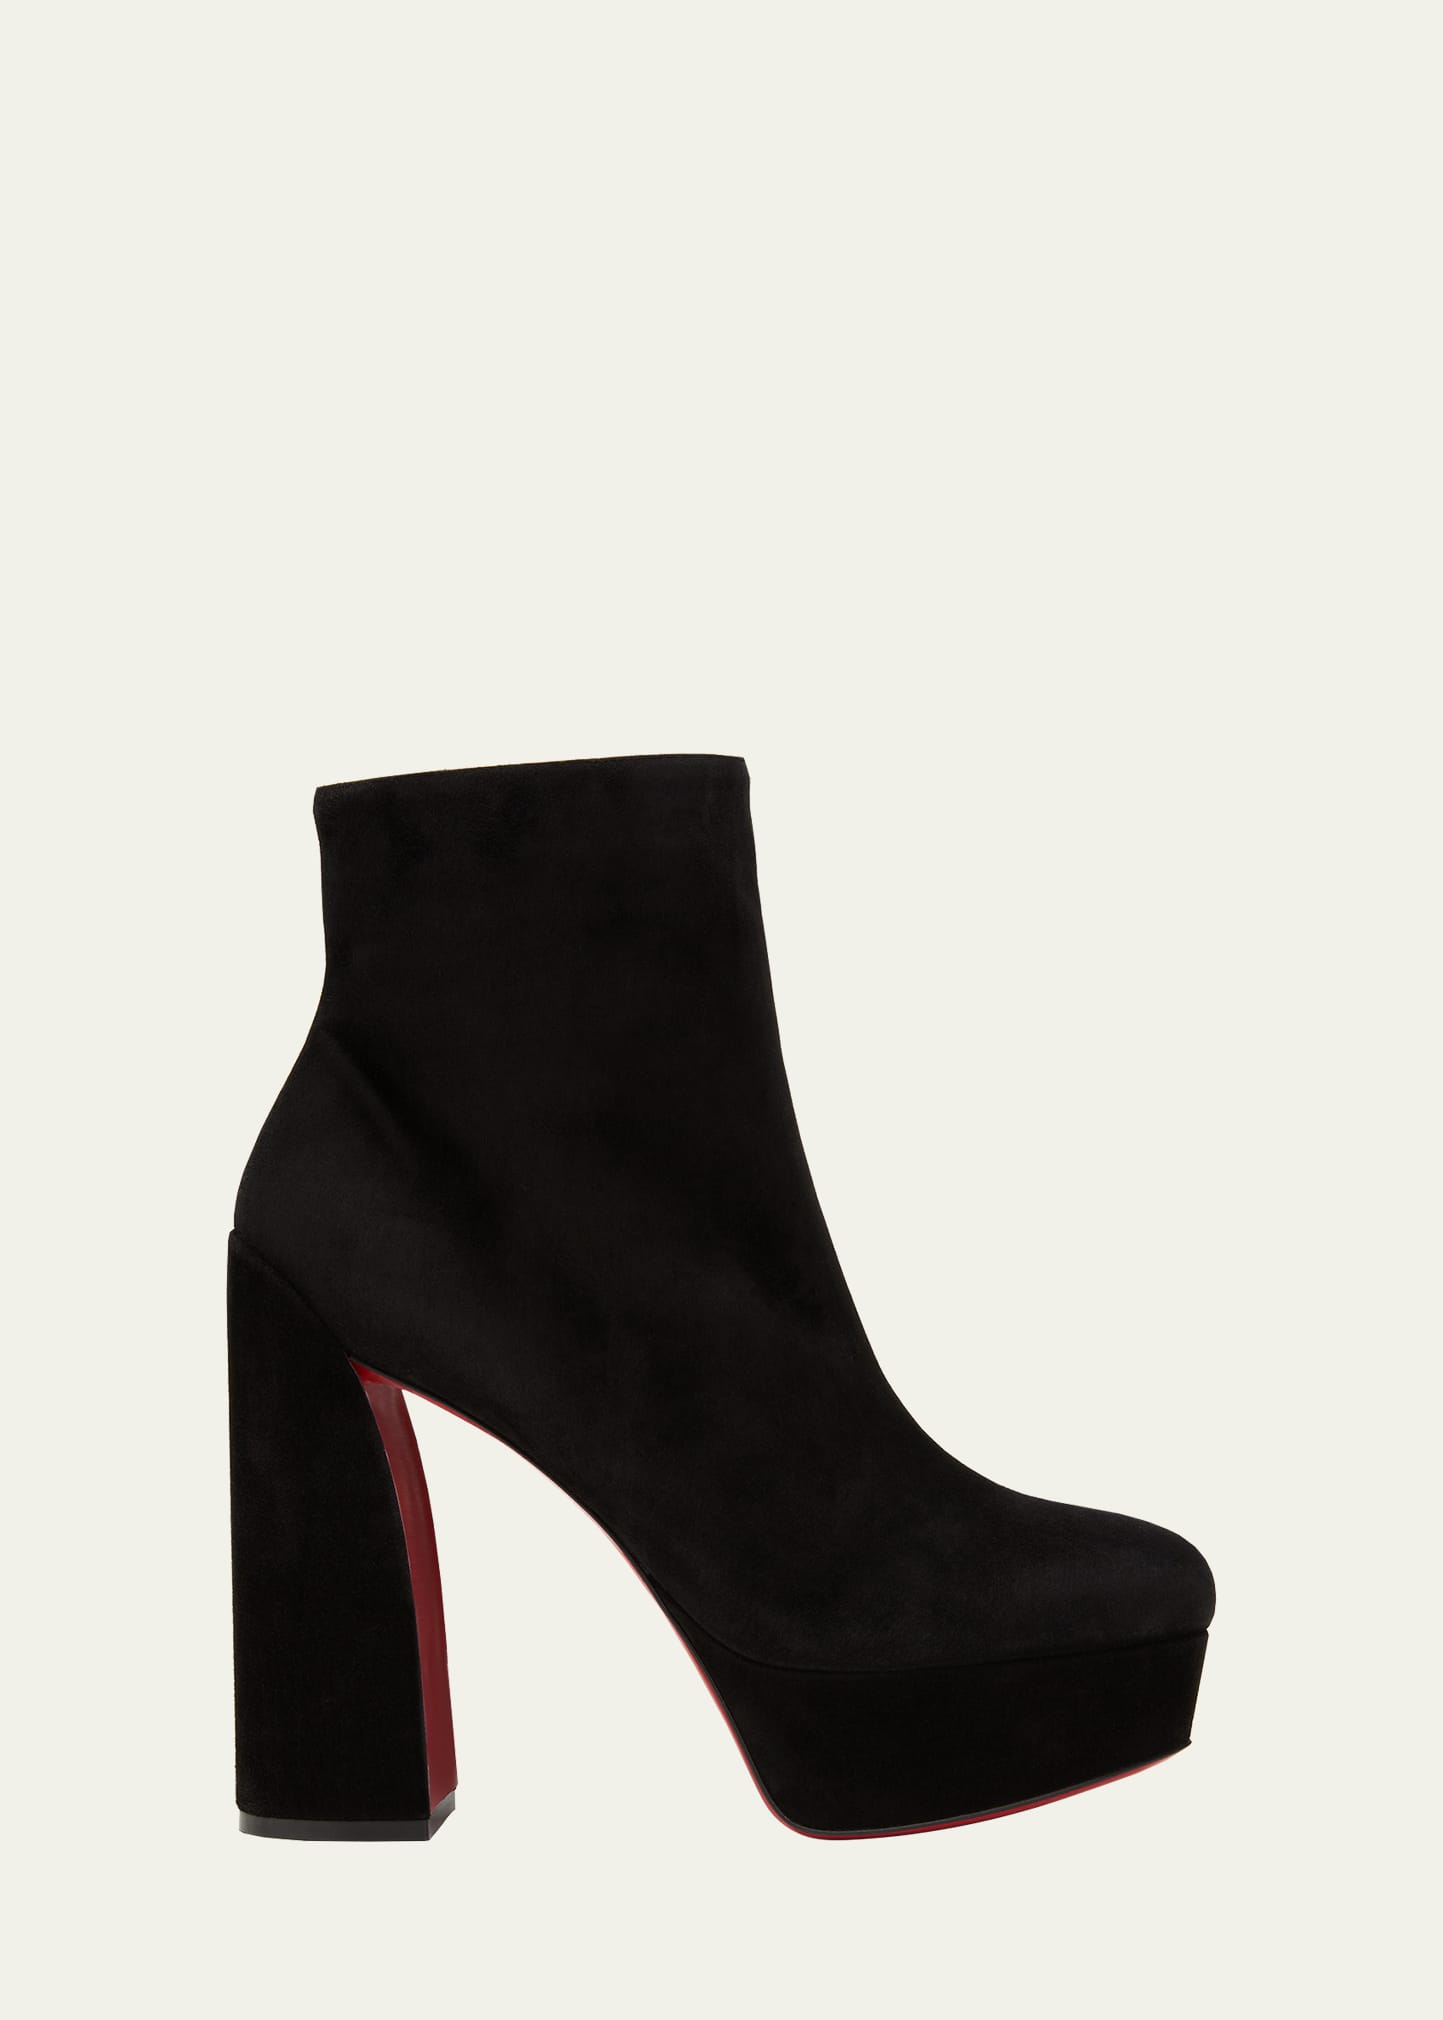 Movida Suede 130mm Red Sole Booties